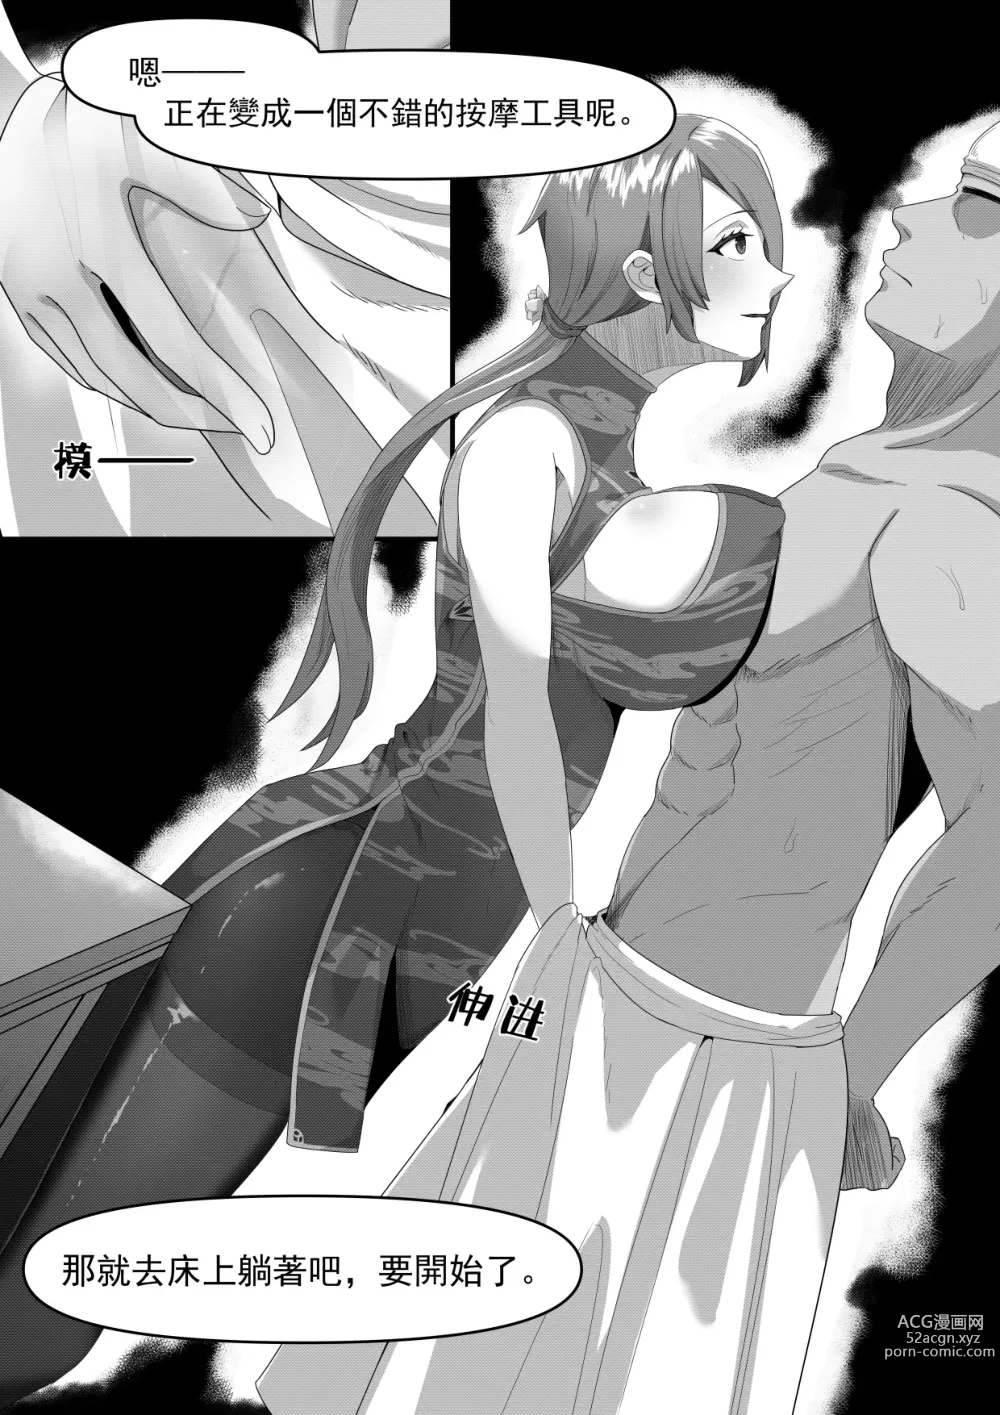 Page 7 of doujinshi A Review